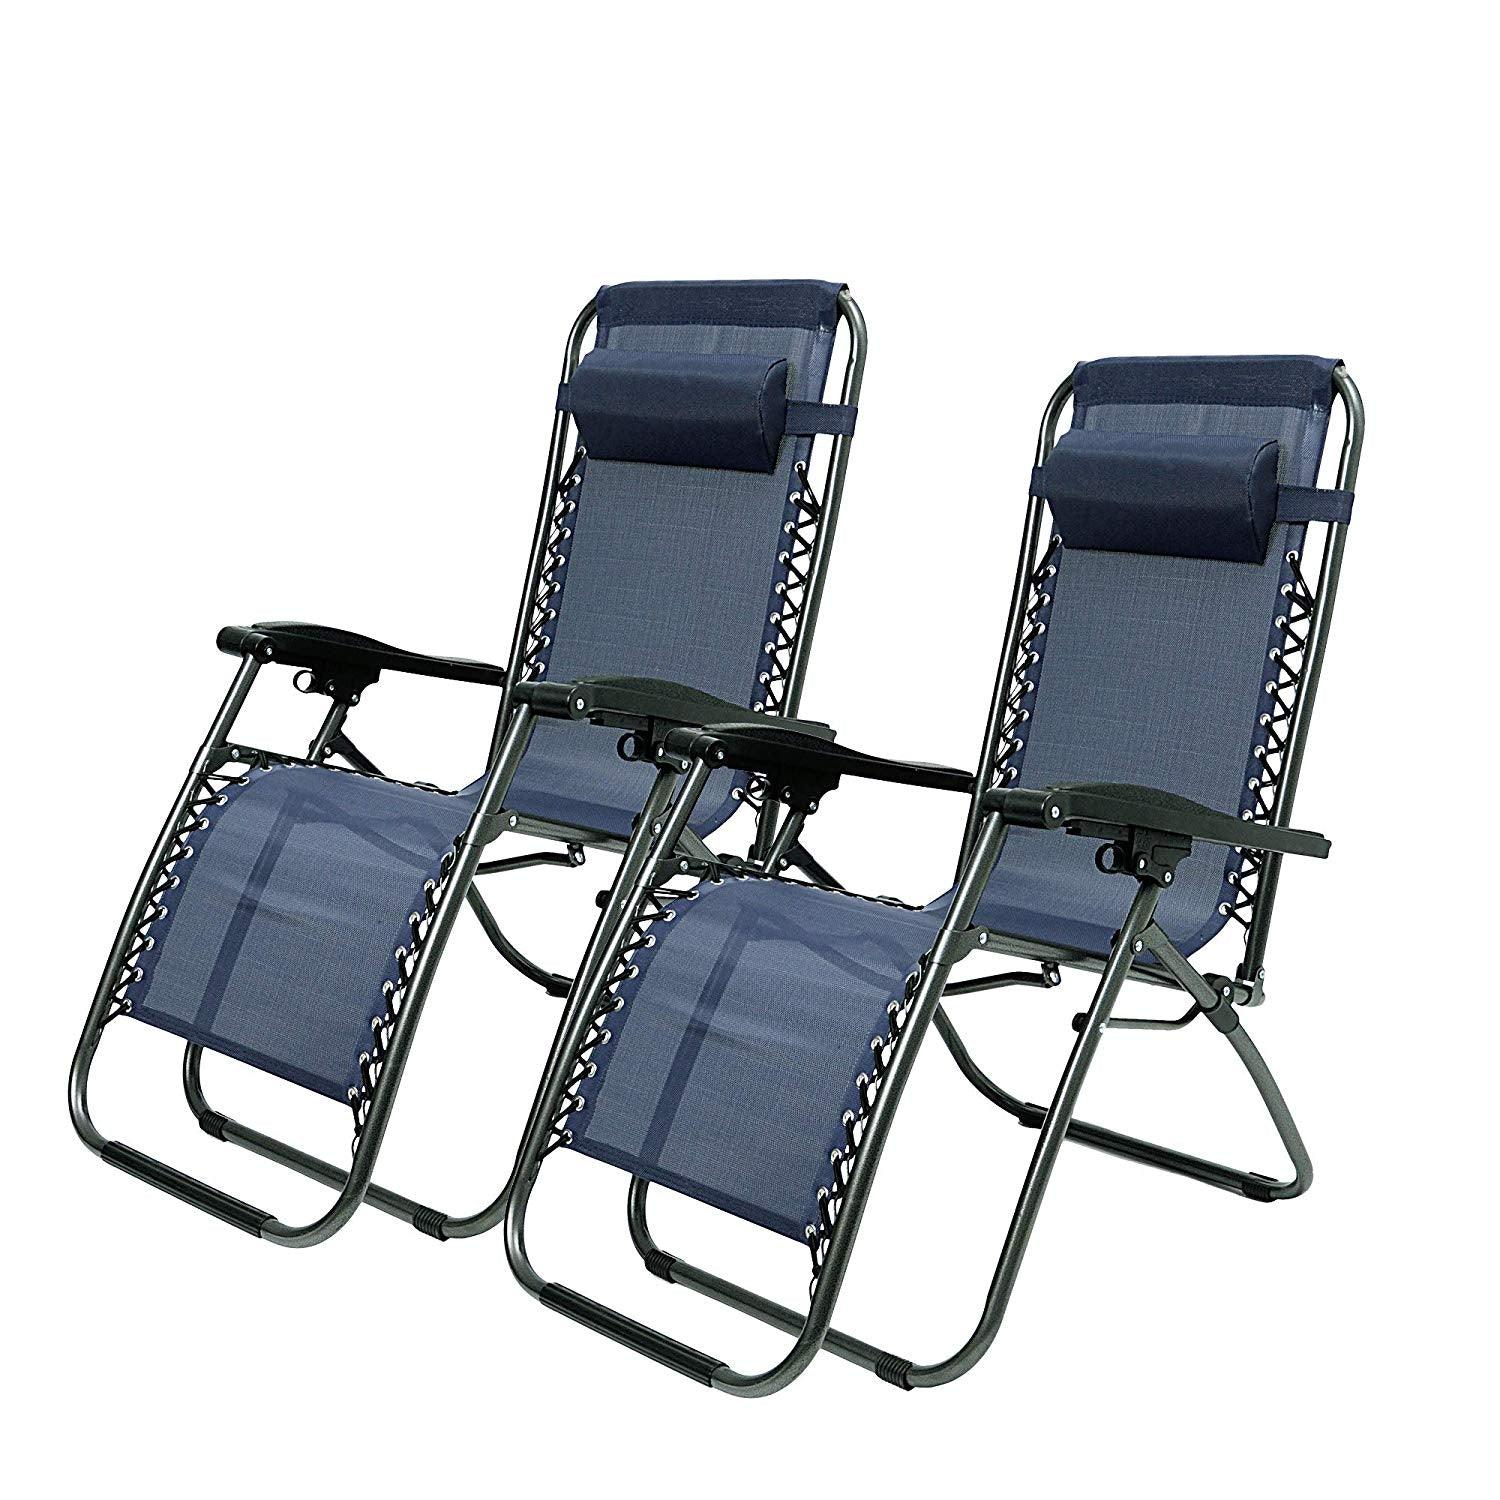 Mydepot Adjustable Zero Gravity Patio Lounge Chairs, 2PC Blue, Patio Chairs, Comfortable, Durable, Outdoor Seating - image 1 of 7